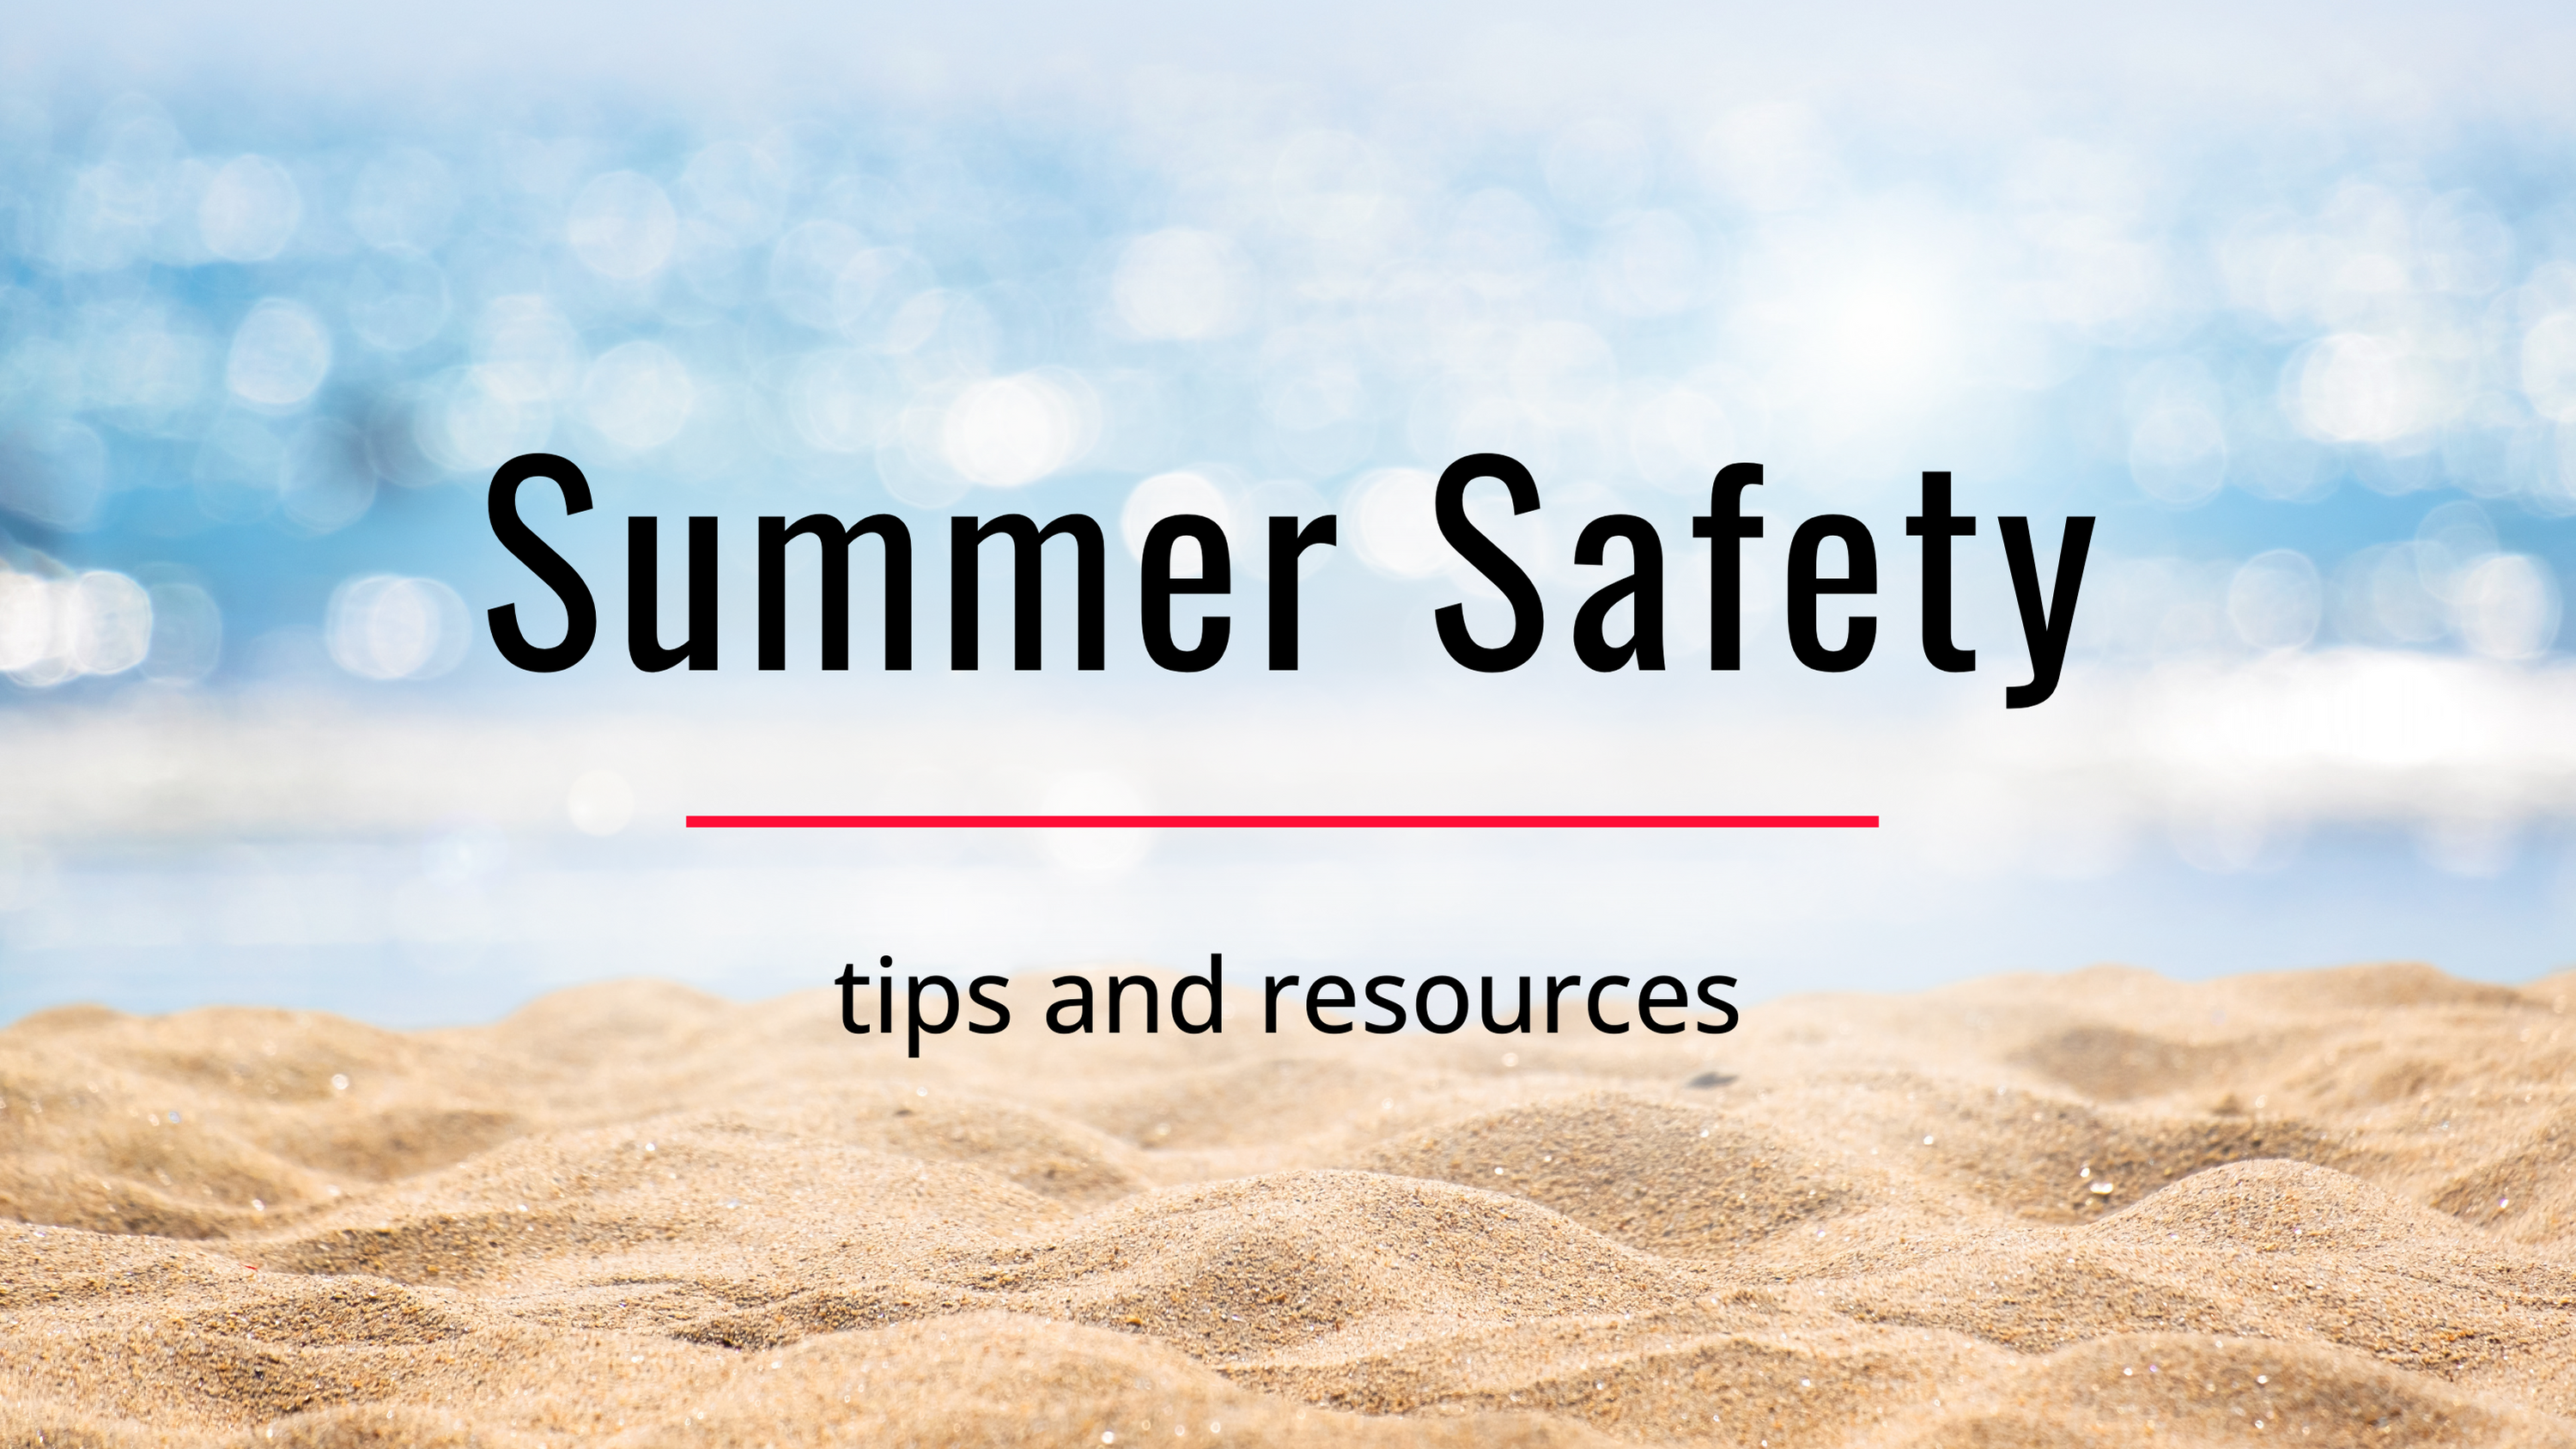 Summer Safety: Tips and resources. Sandy beach background.